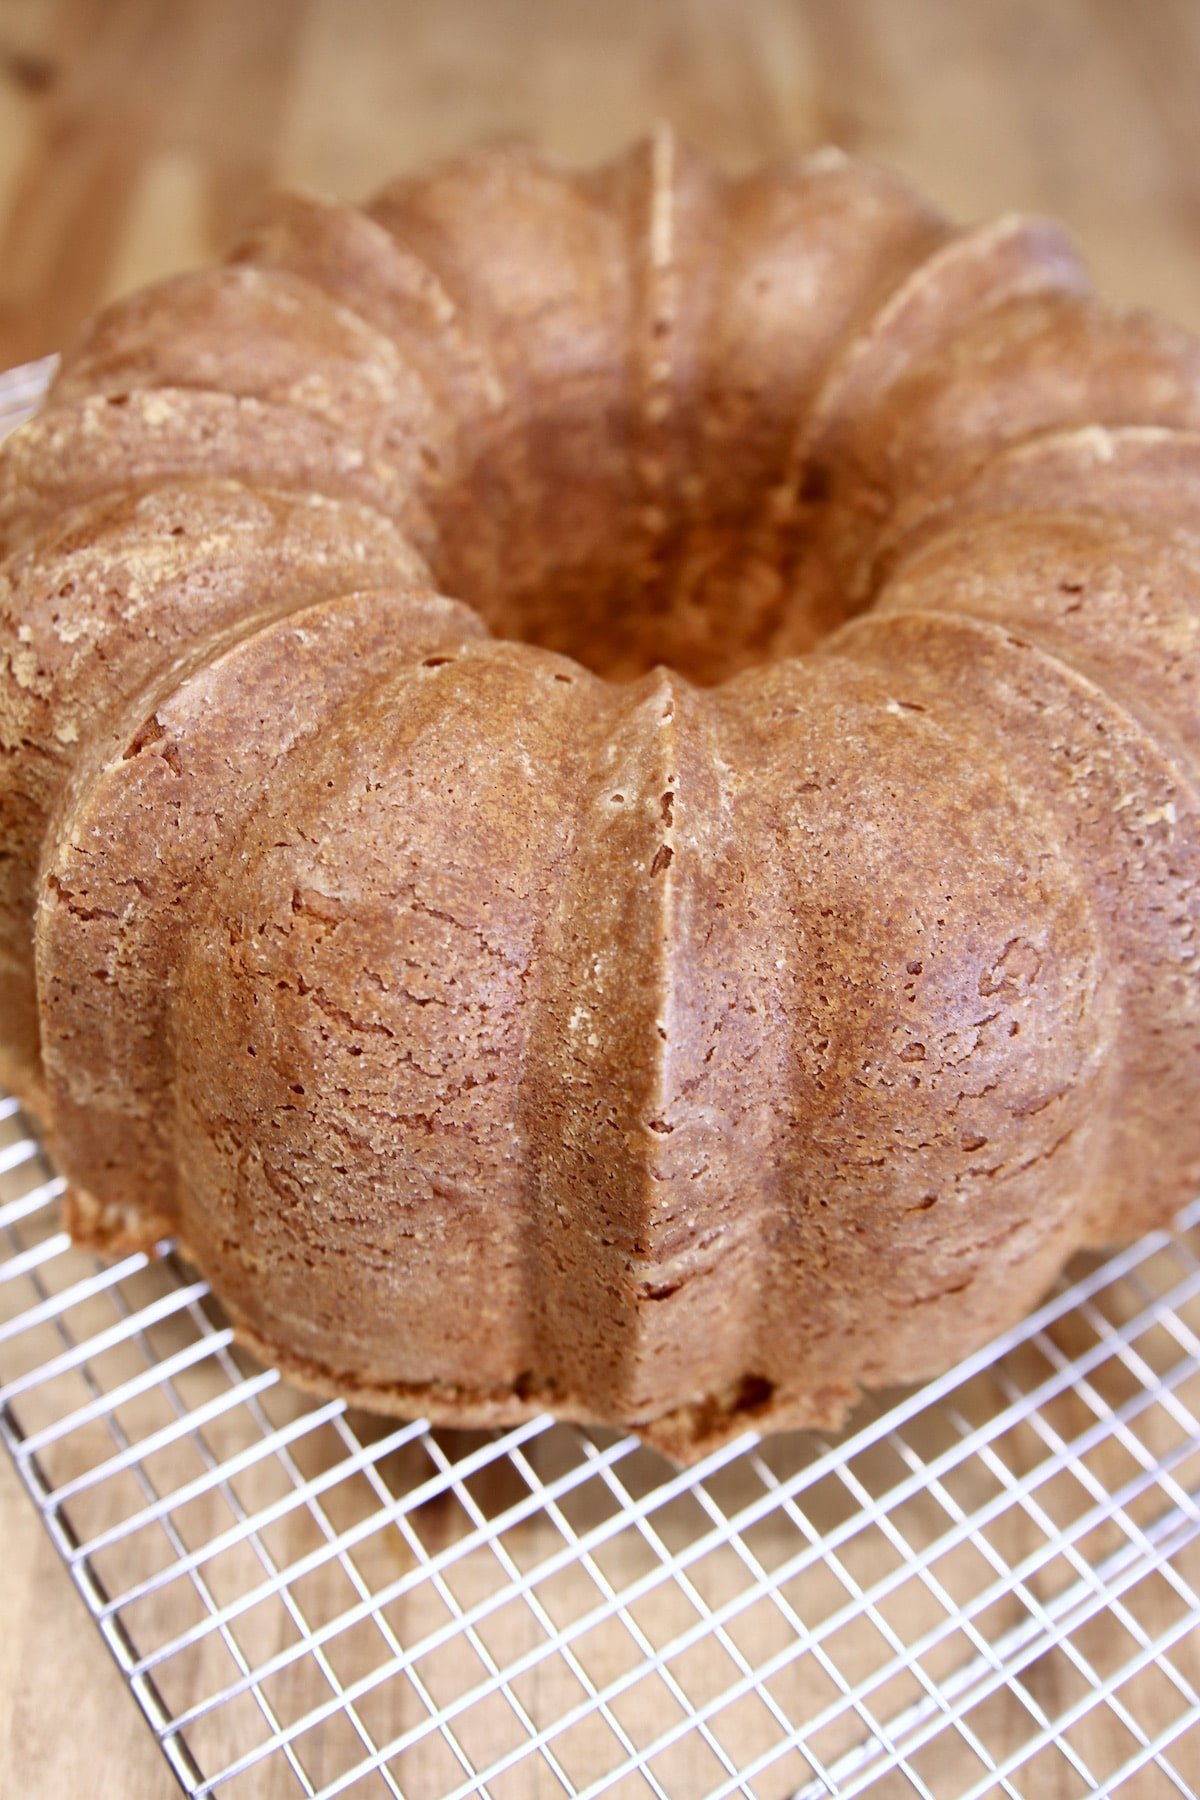 Pound cake cooling on a wire rack.